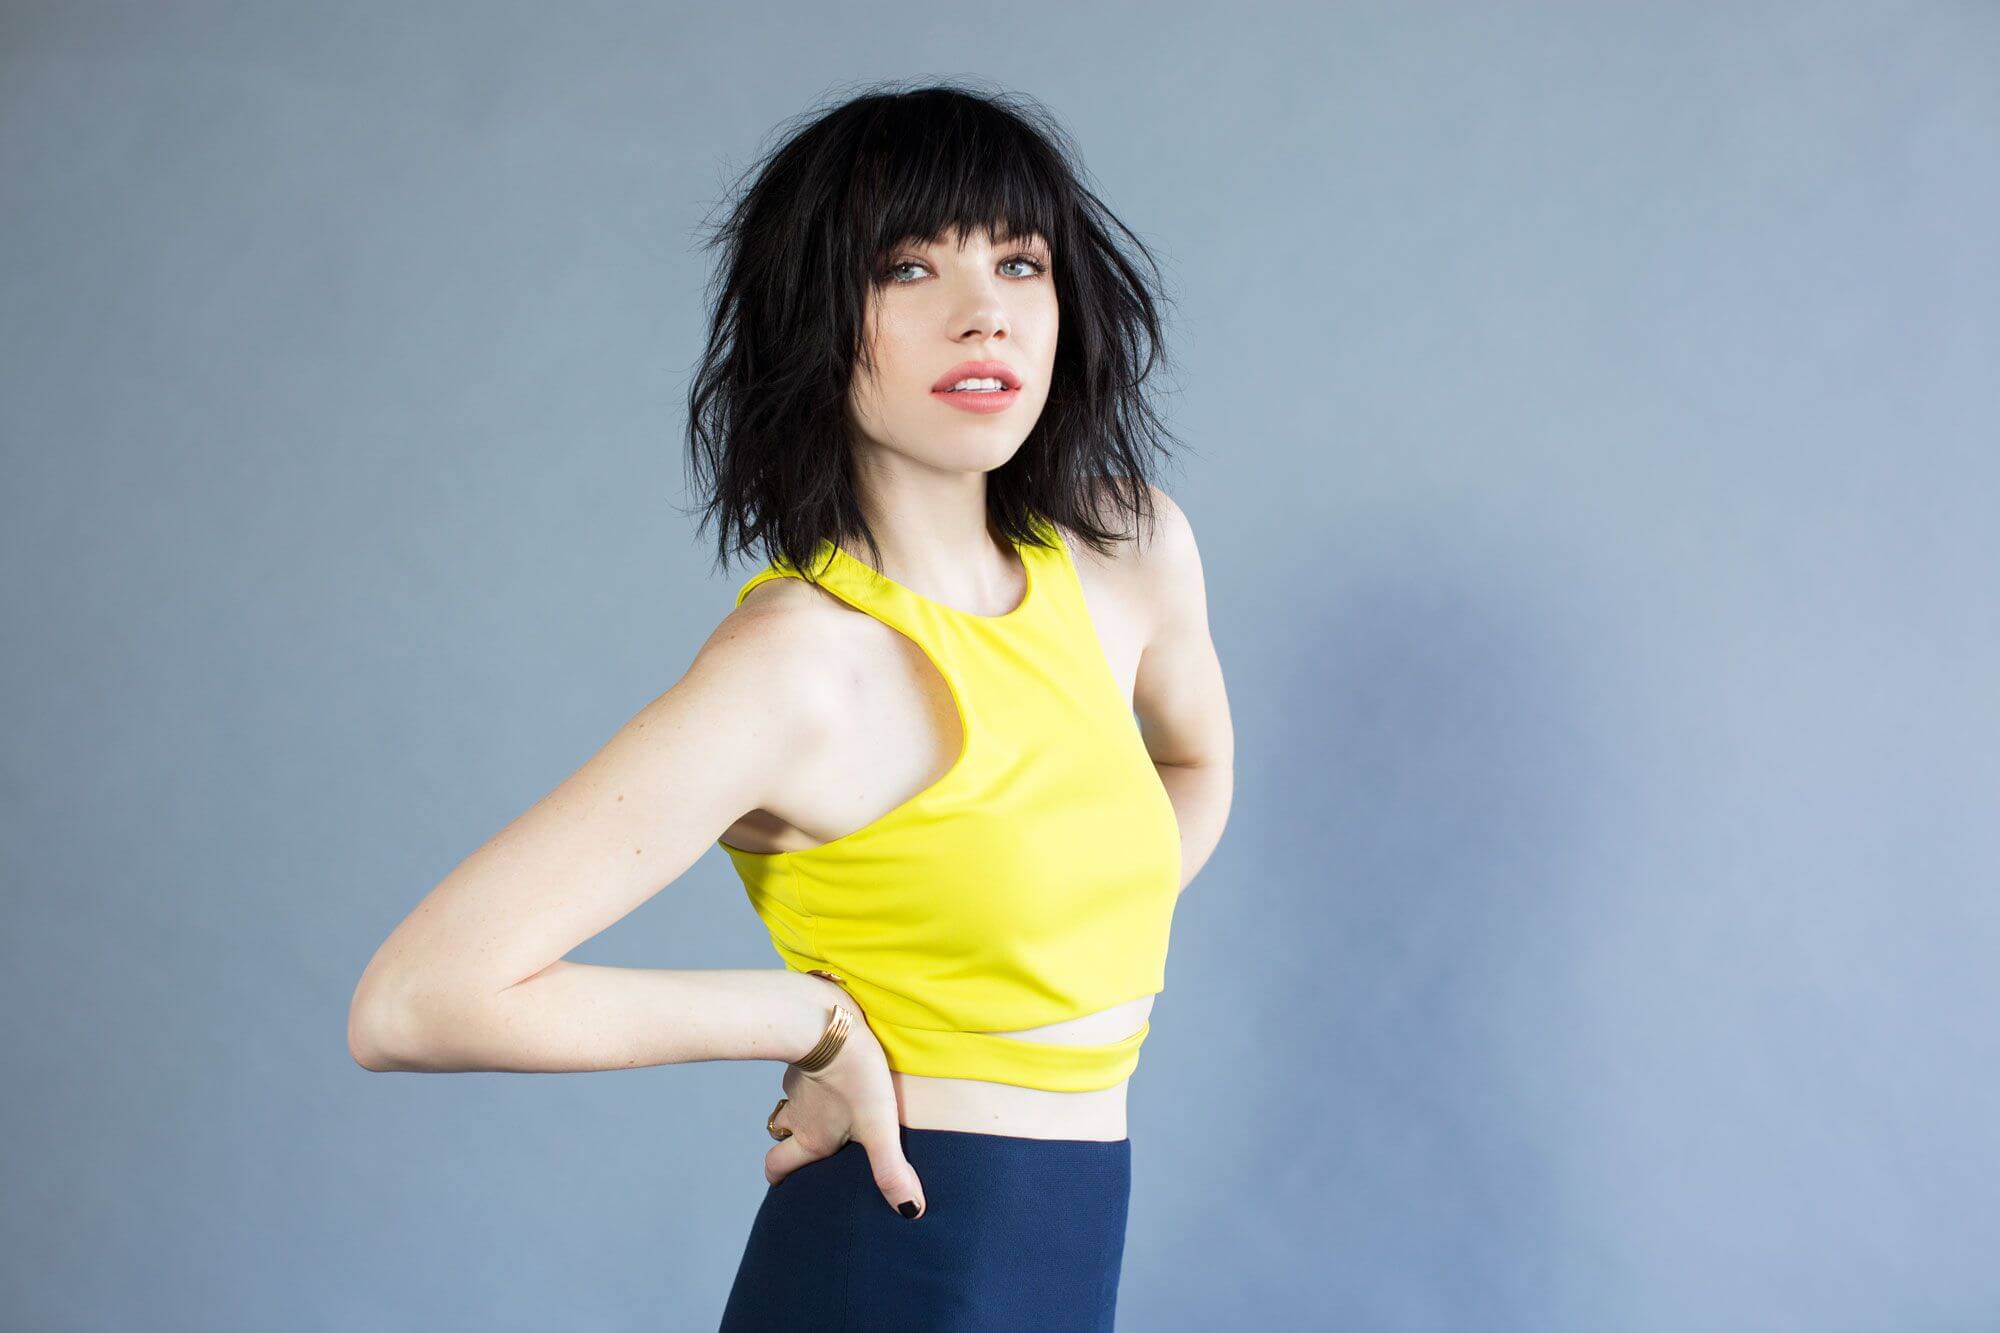 55+ Hot Pictures Of Carly Rae Jepsen Are Heaven On Earth | Best Of Comic Books